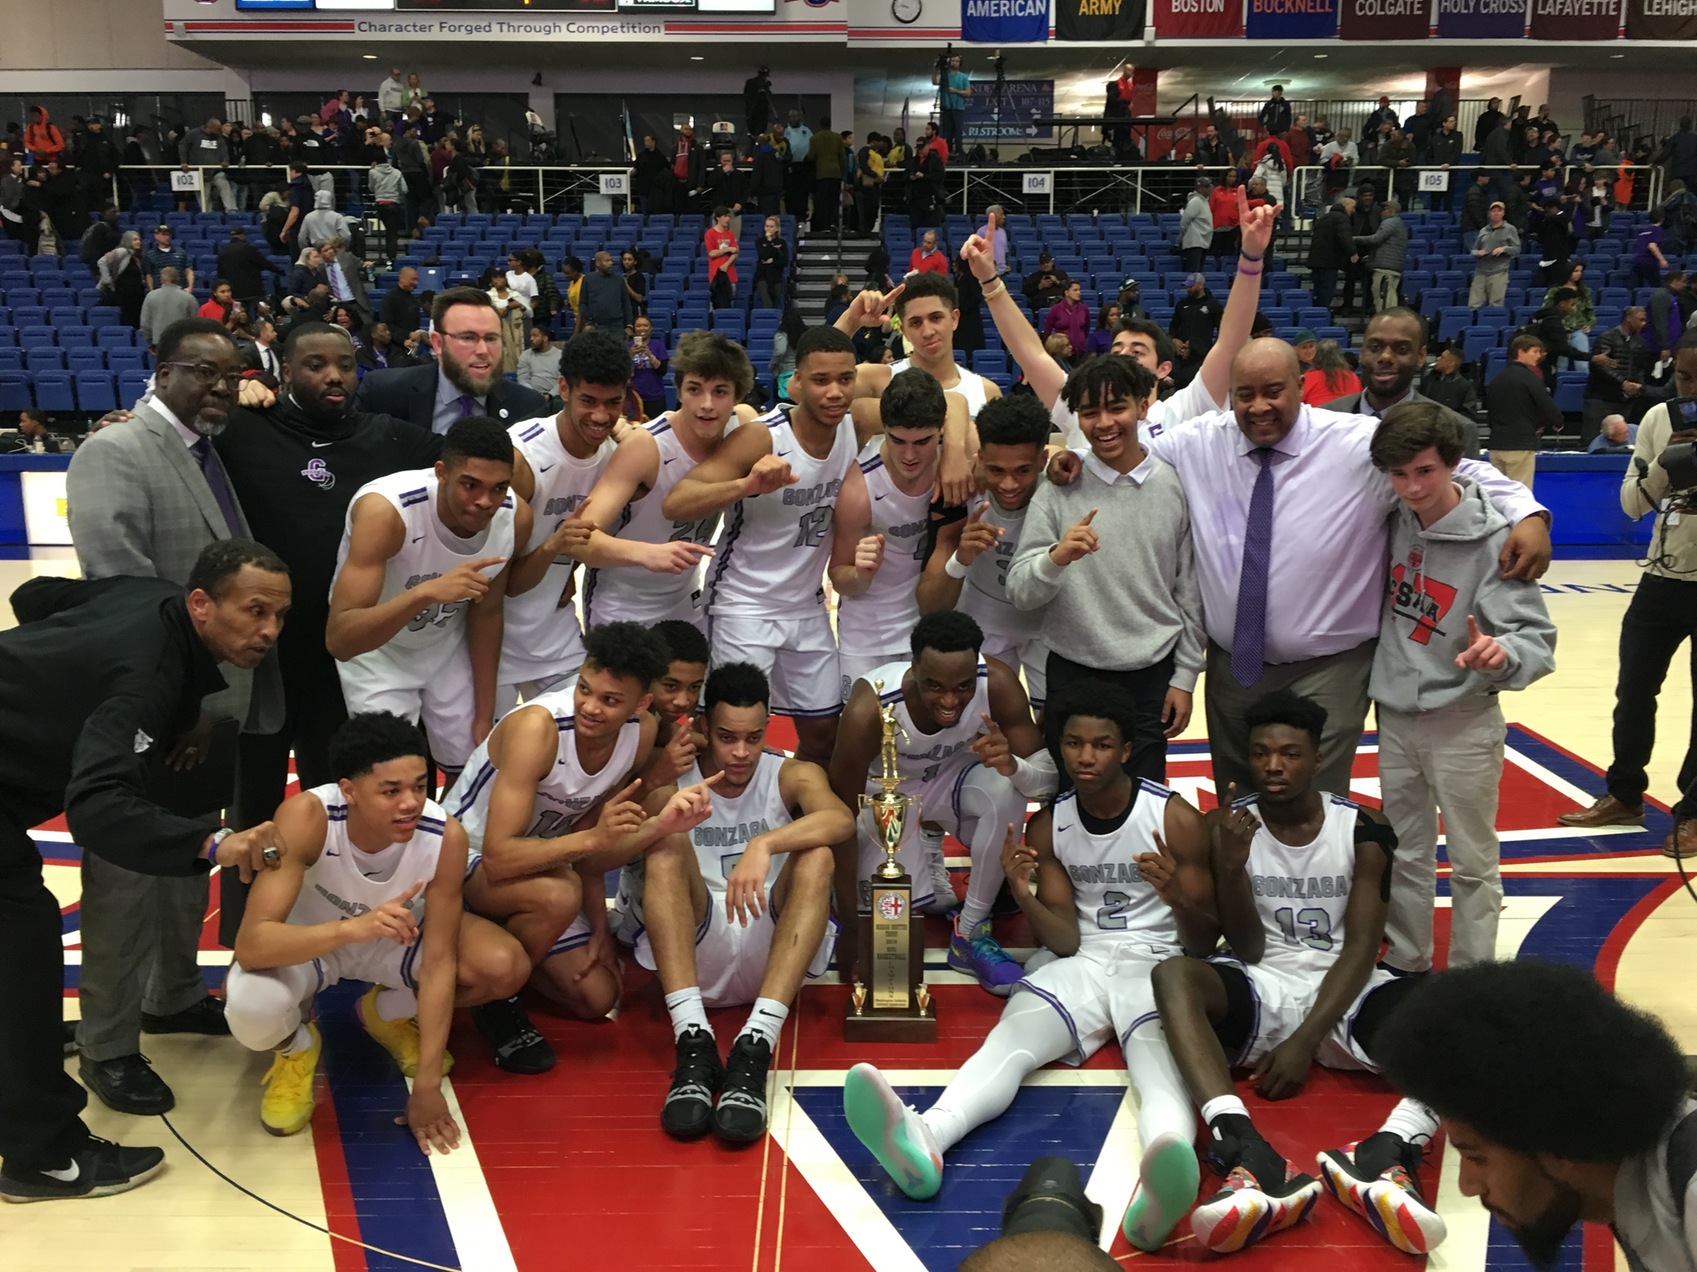 Gonzaga finishes off St. John’s to win its third WCAC boys’ basketball title in five seasons